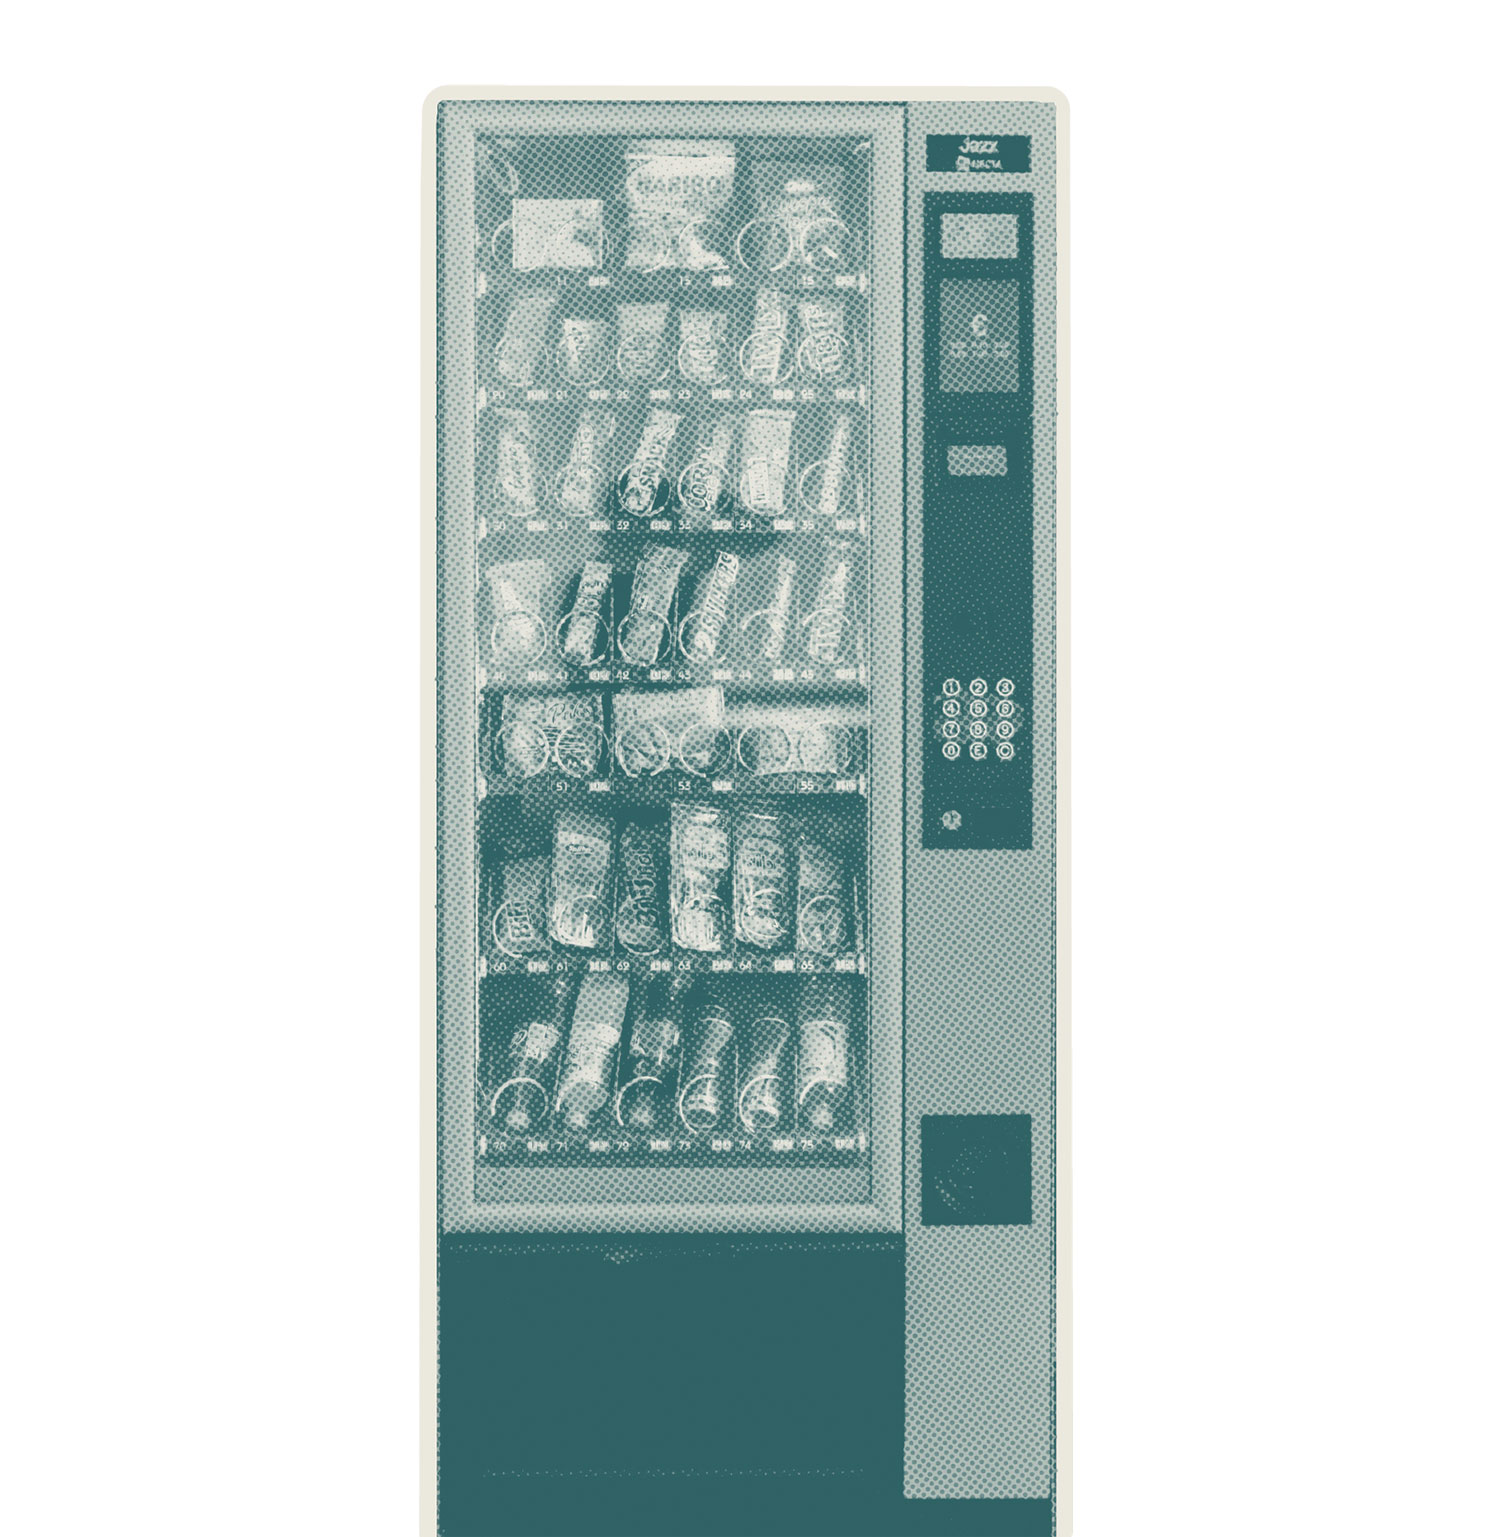 Cutout of a classic-style vending machine holding various candy bars and snacks. It is overlayed in a light aqua blue coloring 